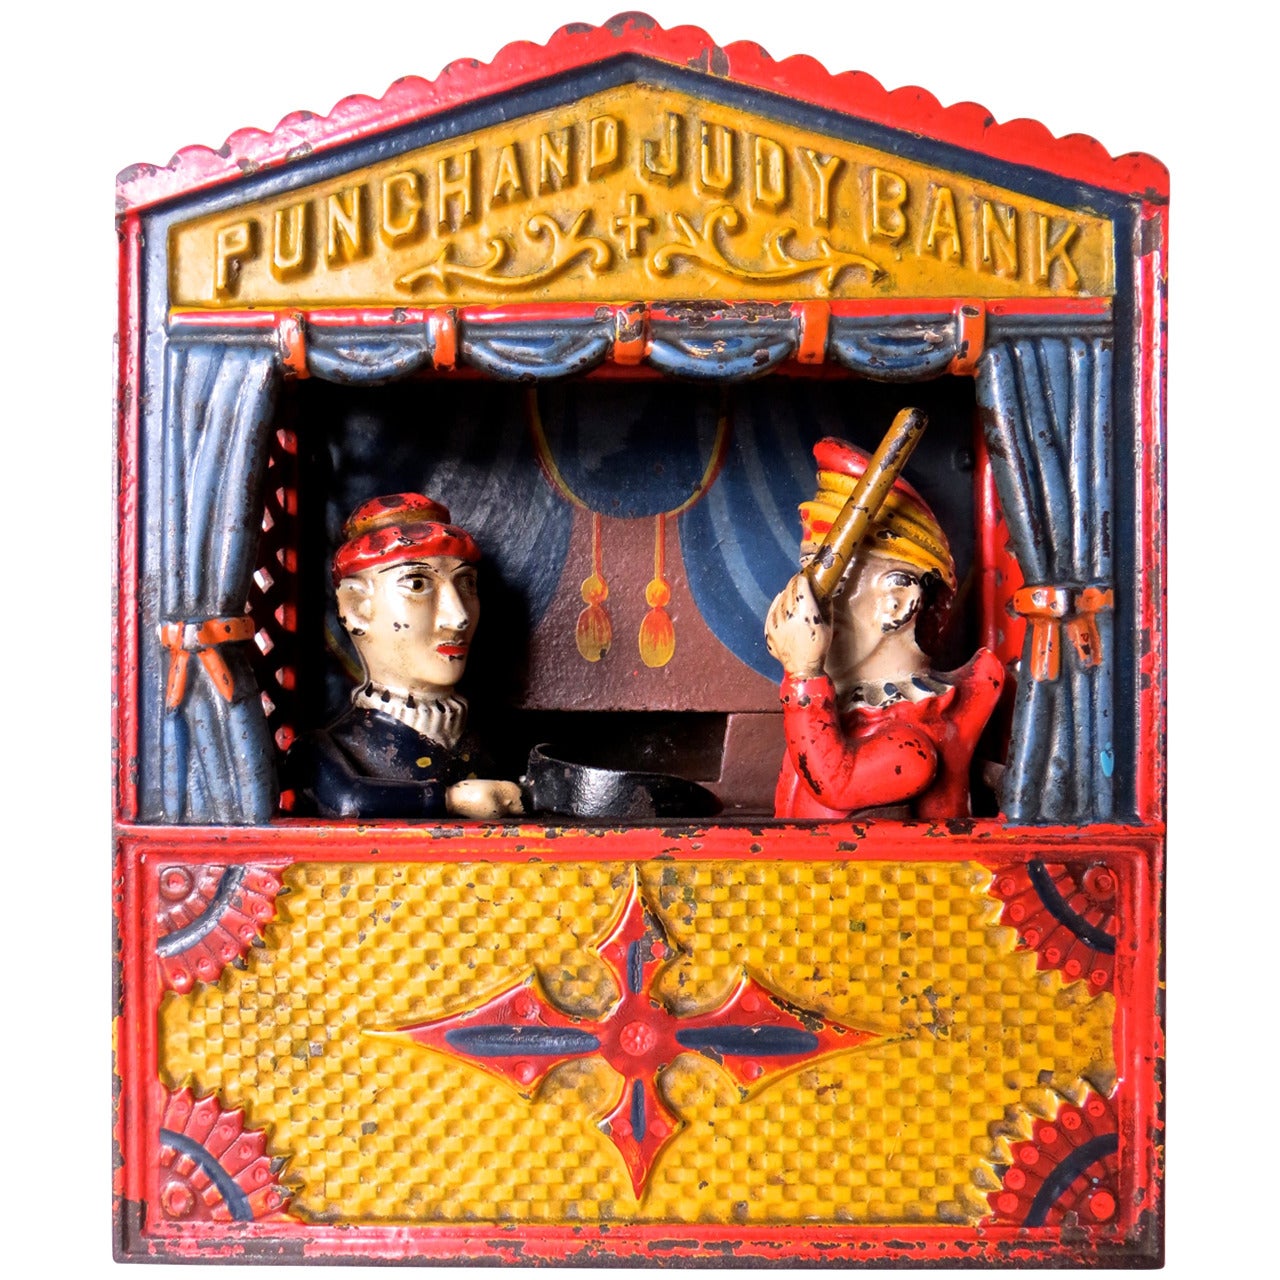 Mechanical Bank "Punch and Judy" Large Letter Variation, circa 1884